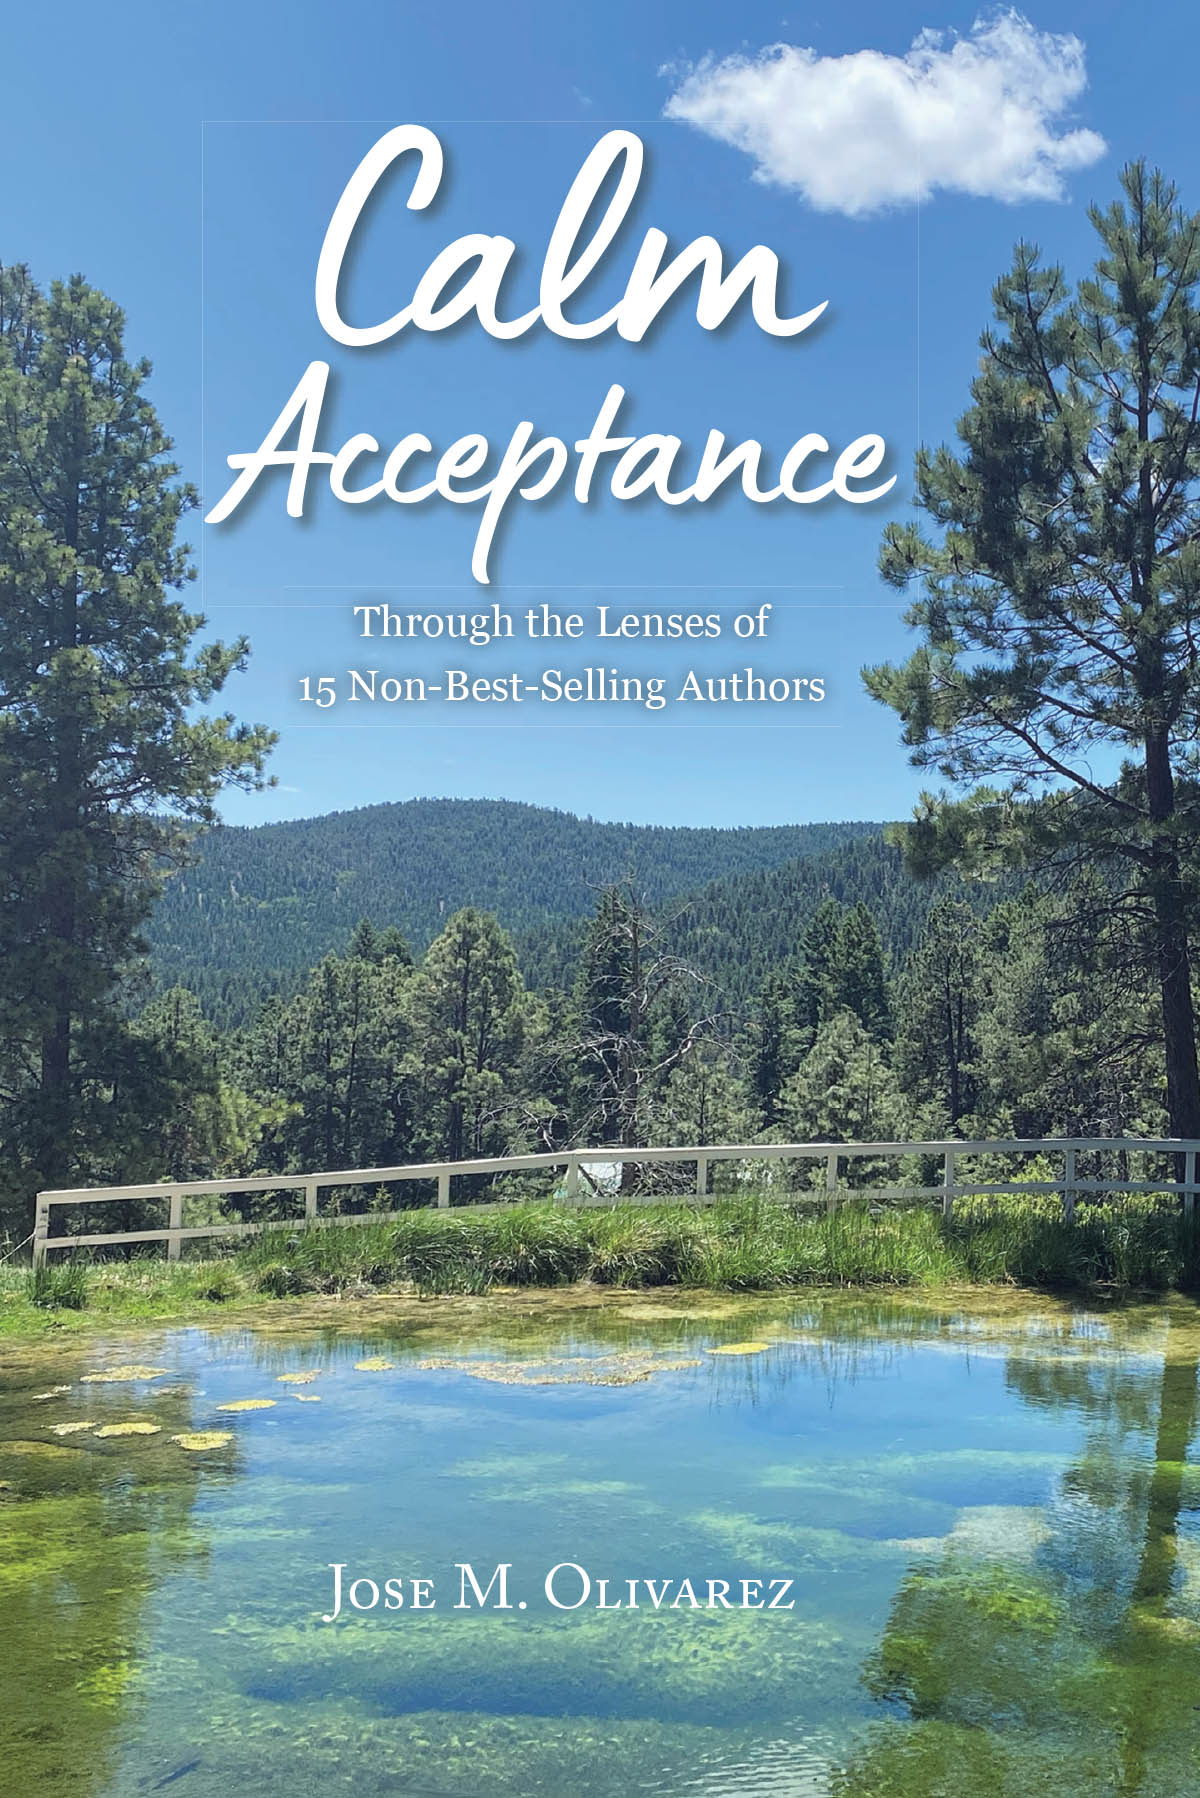 Jose M. Olivarez’s Newly Released “Calm Acceptance: Through the lenses of 15 non-bestselling authors” is a Captivating and Heartfelt Anthology